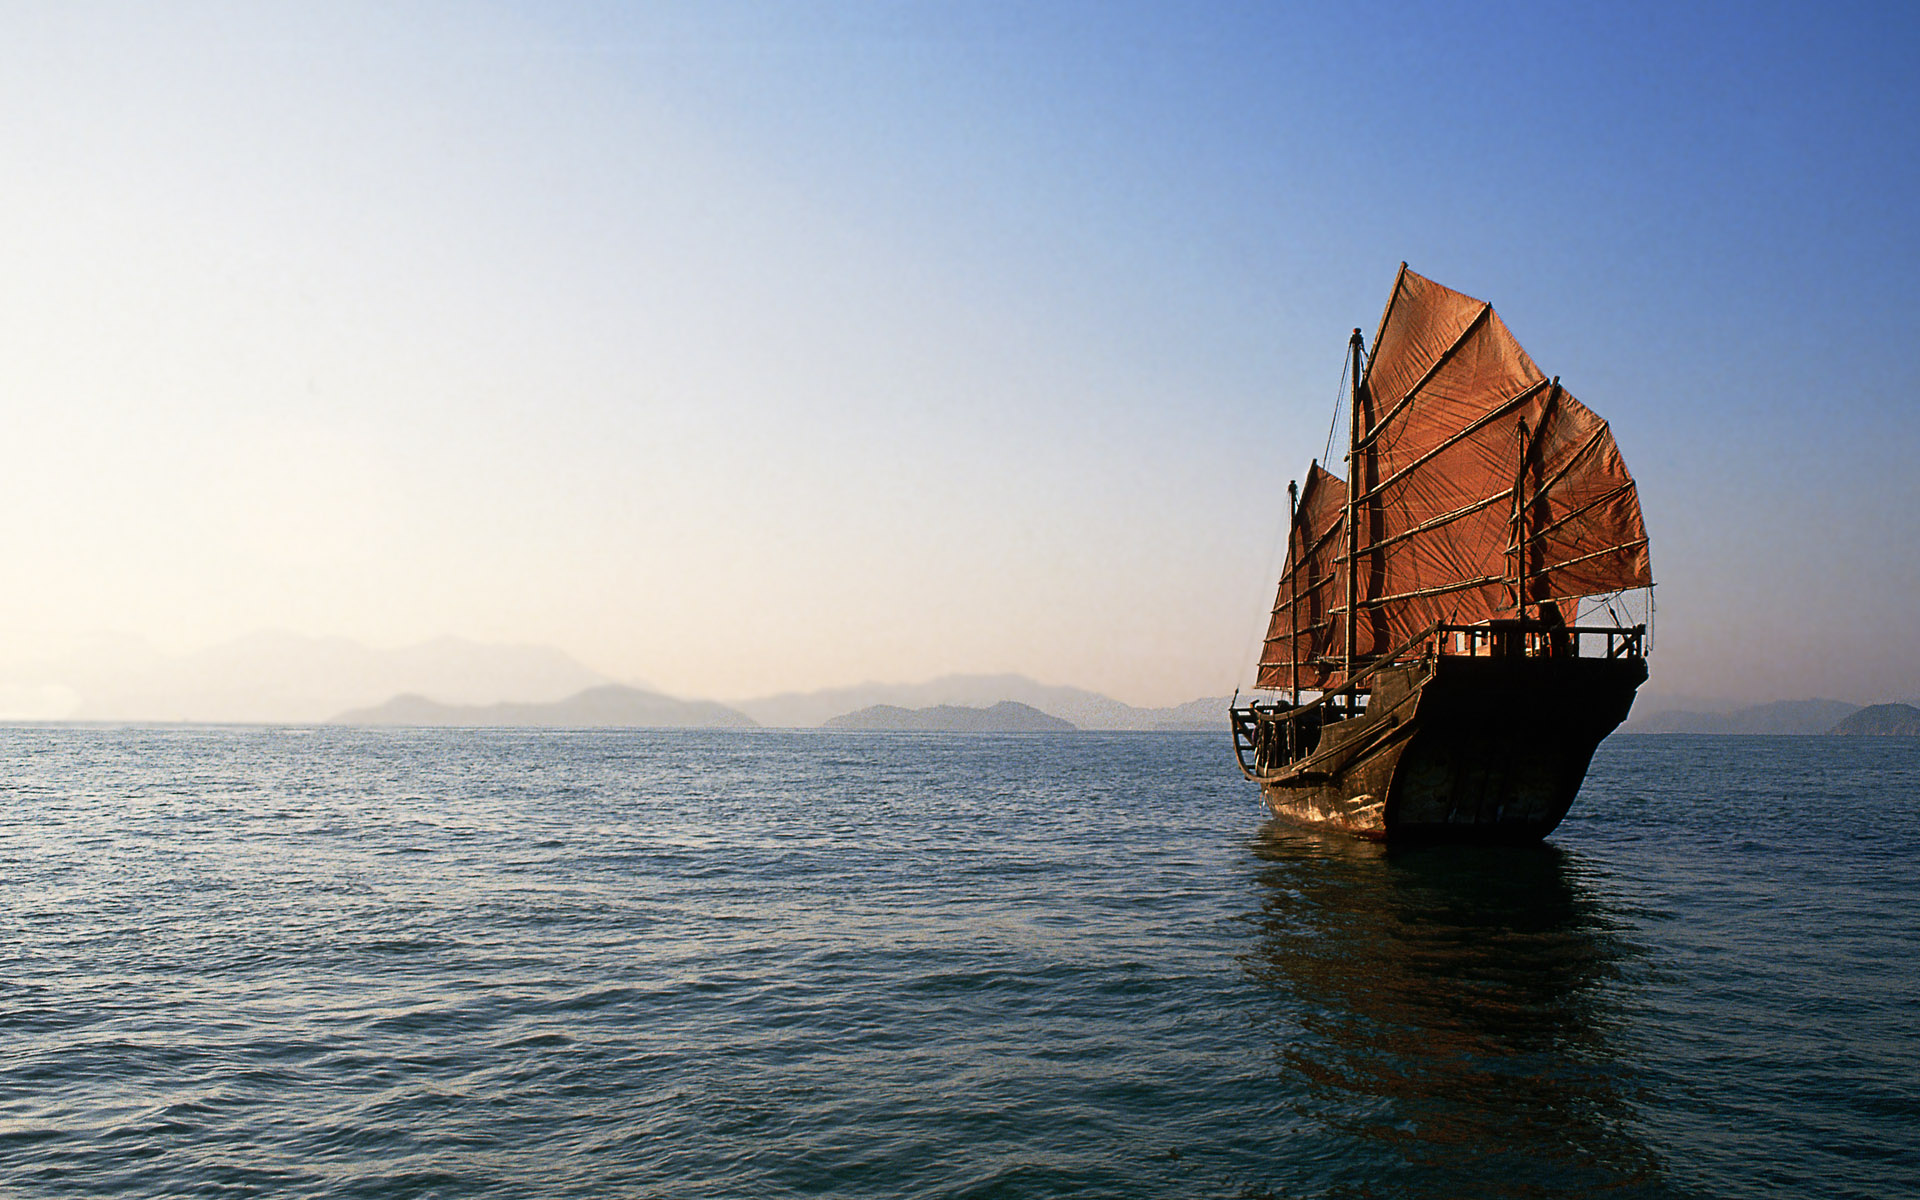  download The ancient Chinese ship wallpapers and images 1920x1200